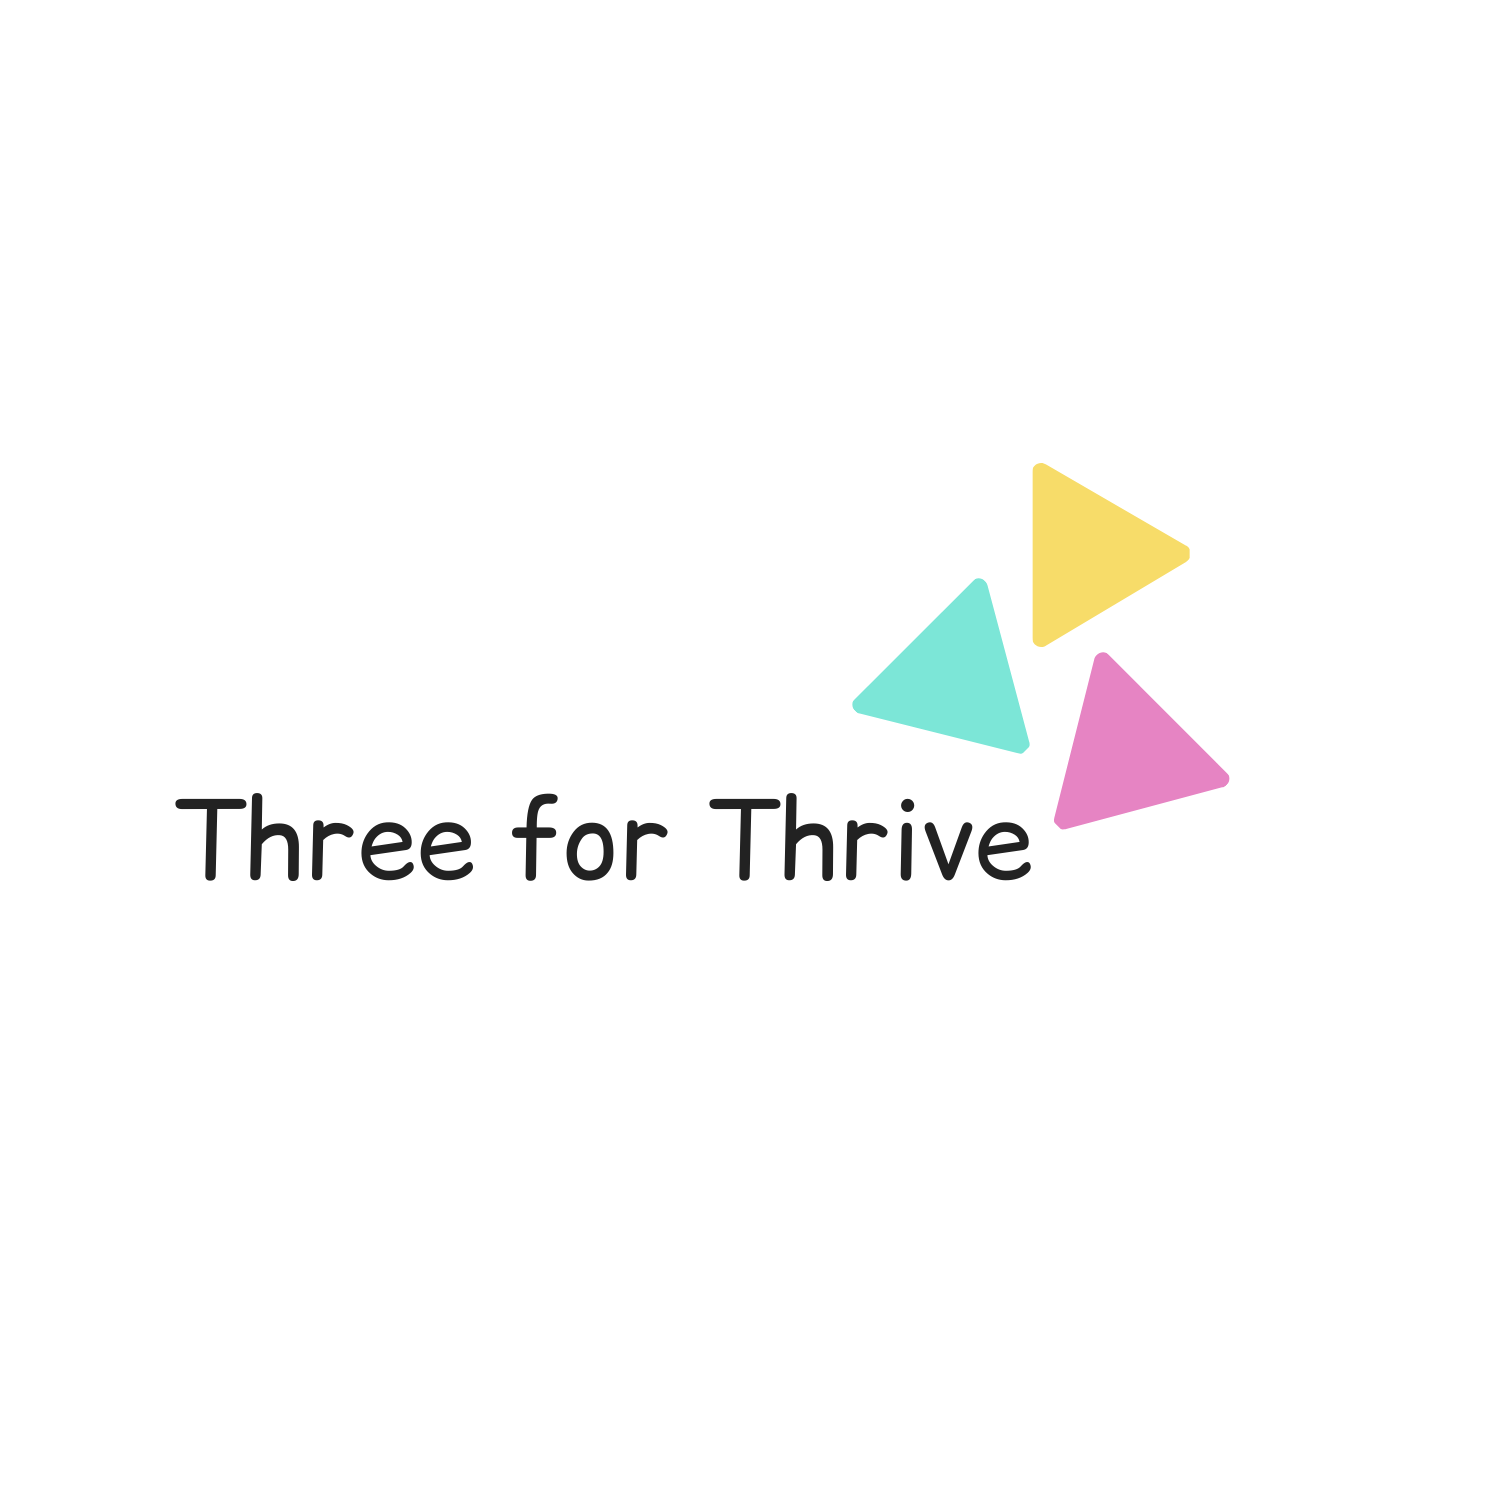 Three for Thrive